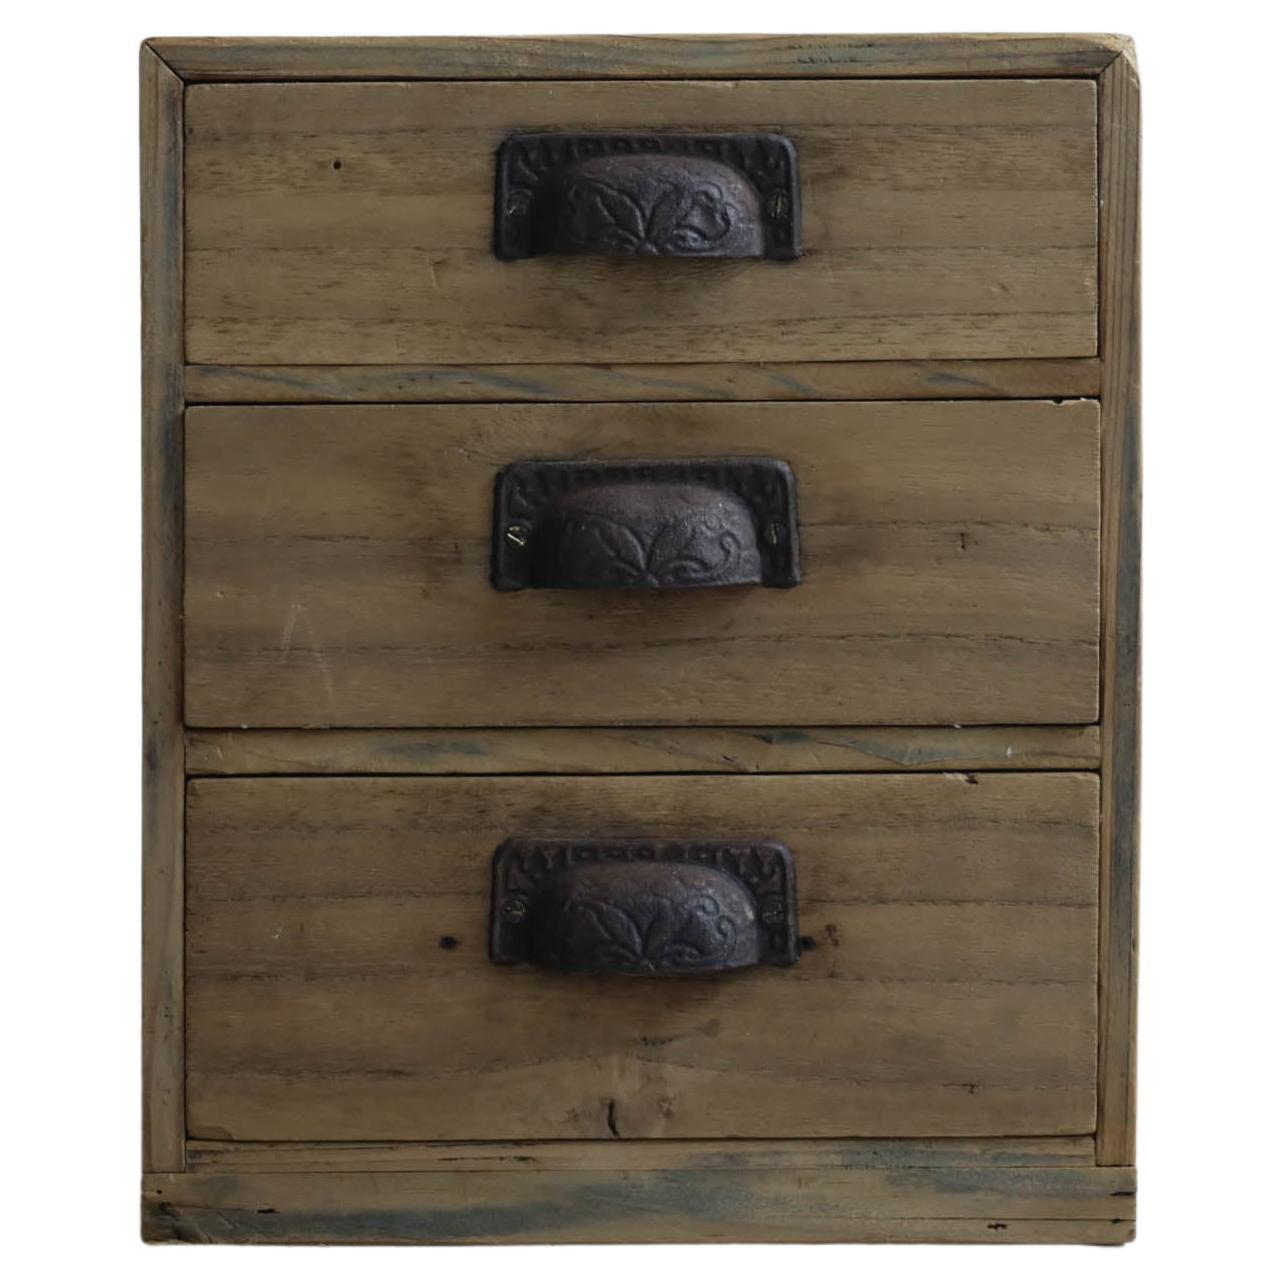 Japanese Antique Chests of Drawers 1900s-1926s, Wabi-Sabi